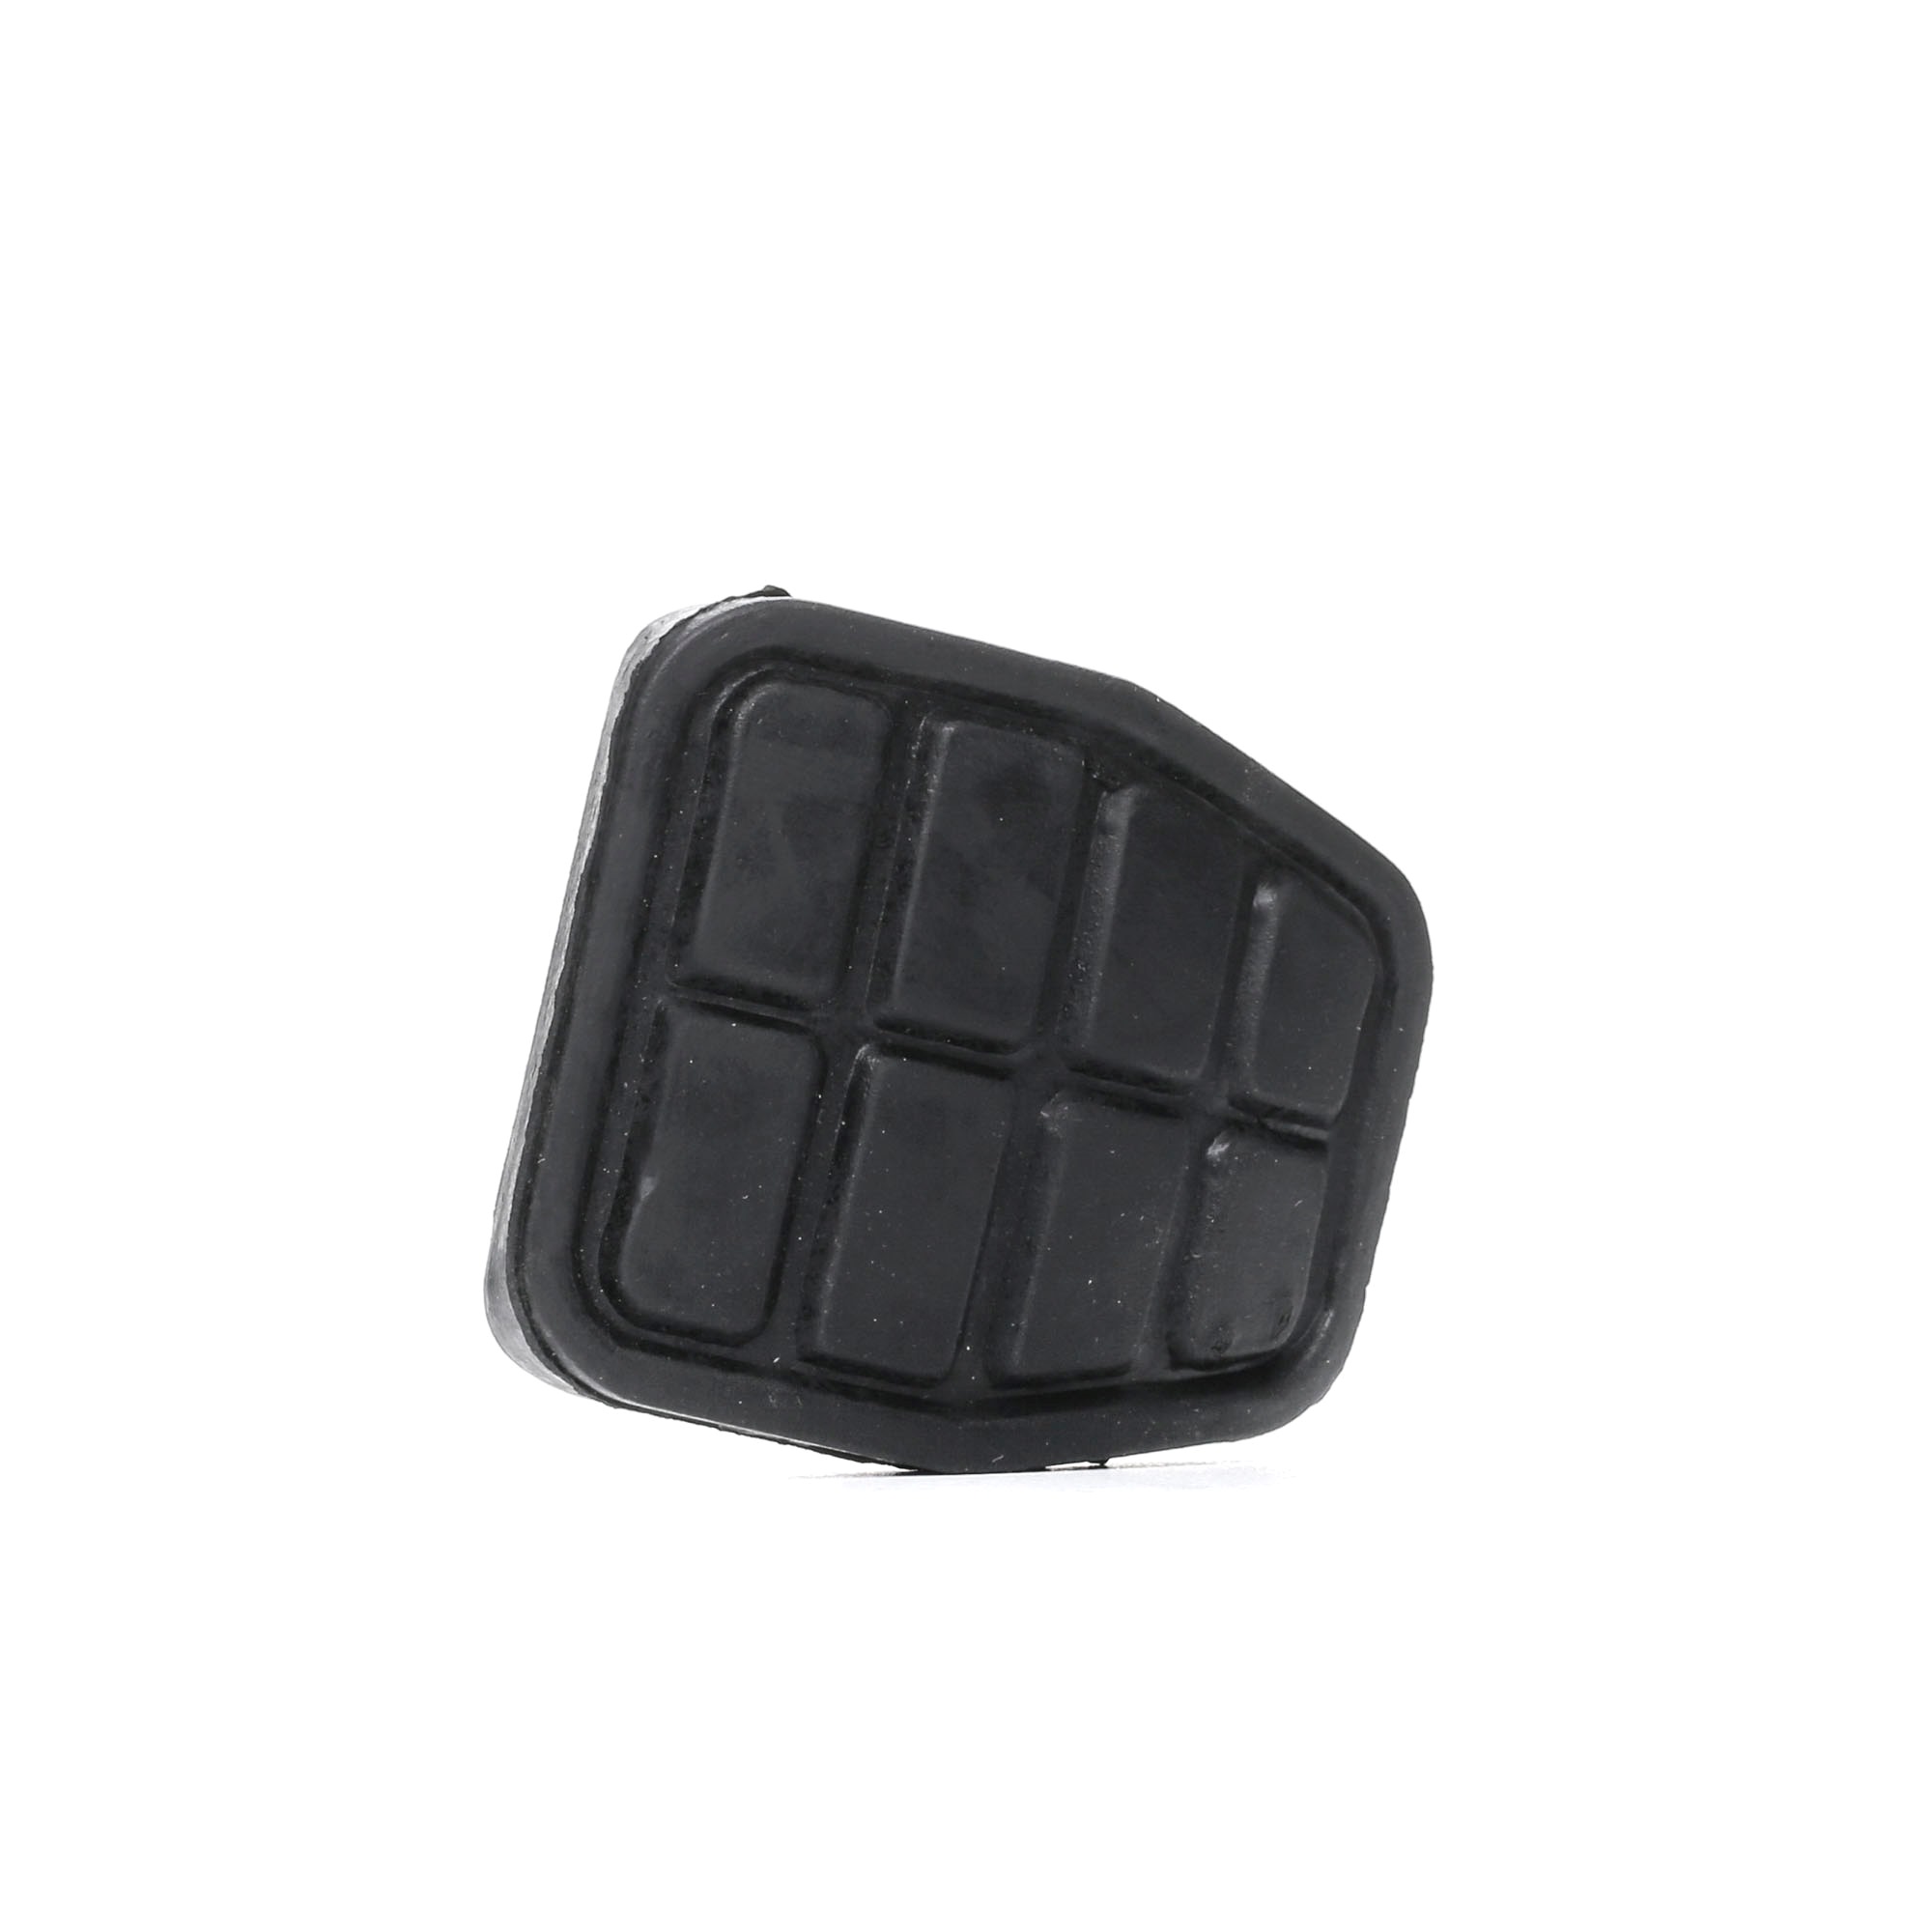 Image of AIC Pedal Covers VW,AUDI,FORD 52862 321721173,321721173C,6X0721173A Pedal Pads,Pedal Lining, brake pedal 321721173,321721173C,6X0721173A,321721173